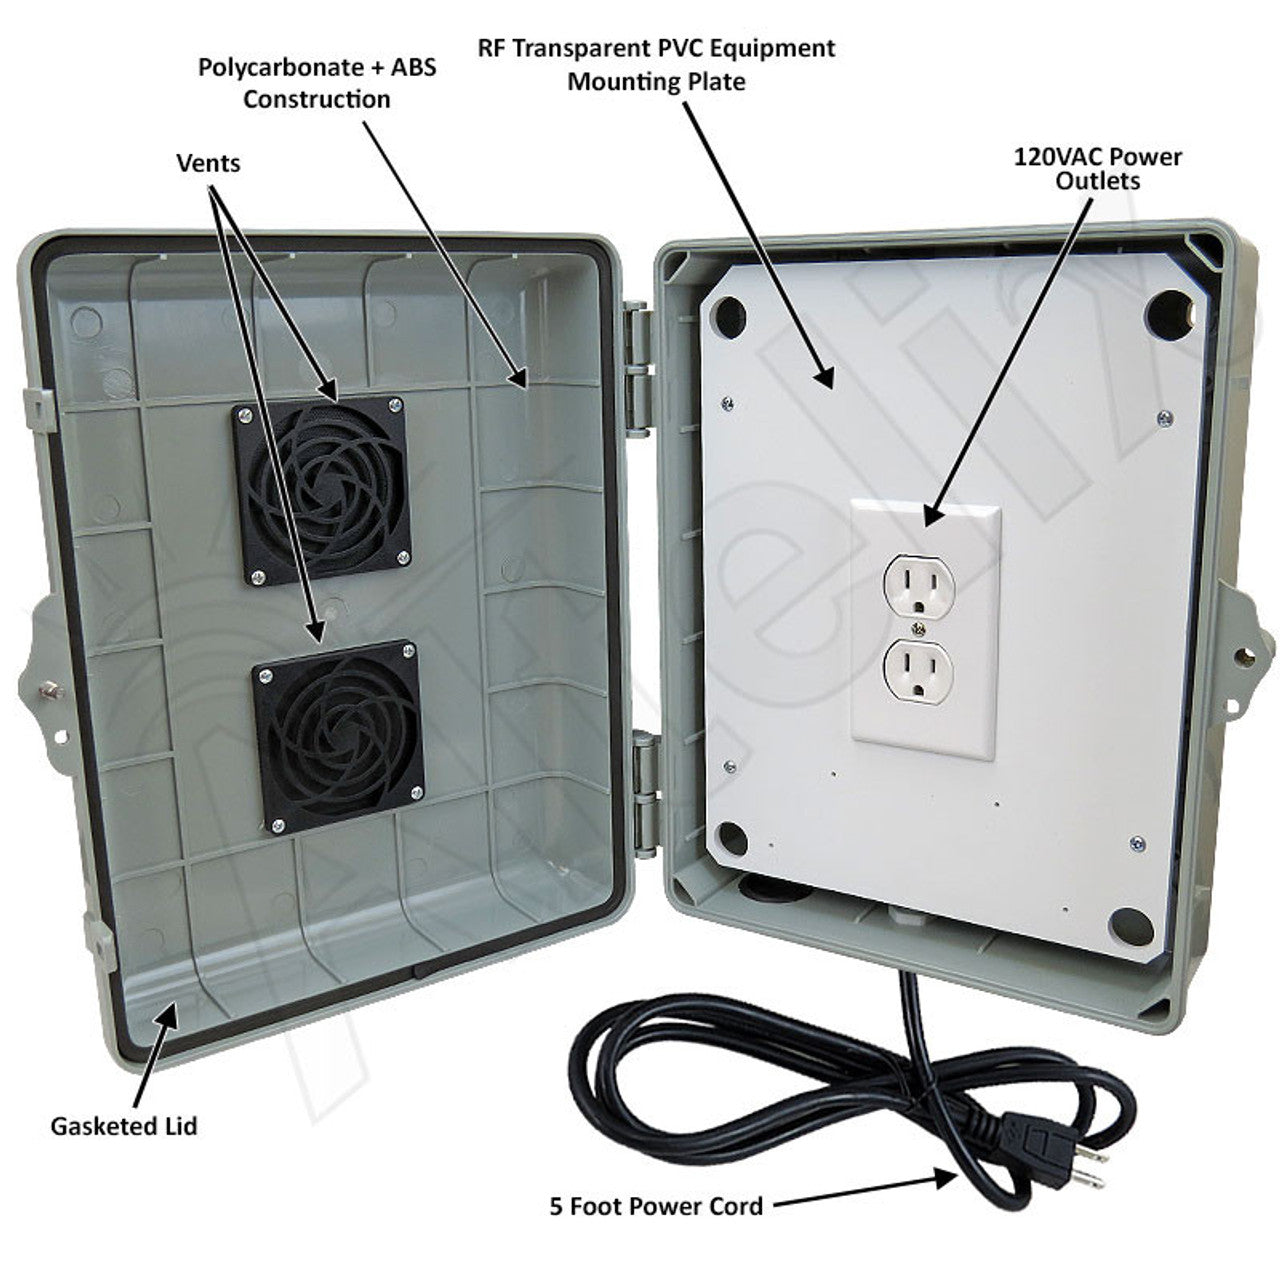 Altelix Weatherproof Vented WiFi Enclosure with No-Drill Equipment Mounting Plate, 120VAC Outlets and Power Cord - 0